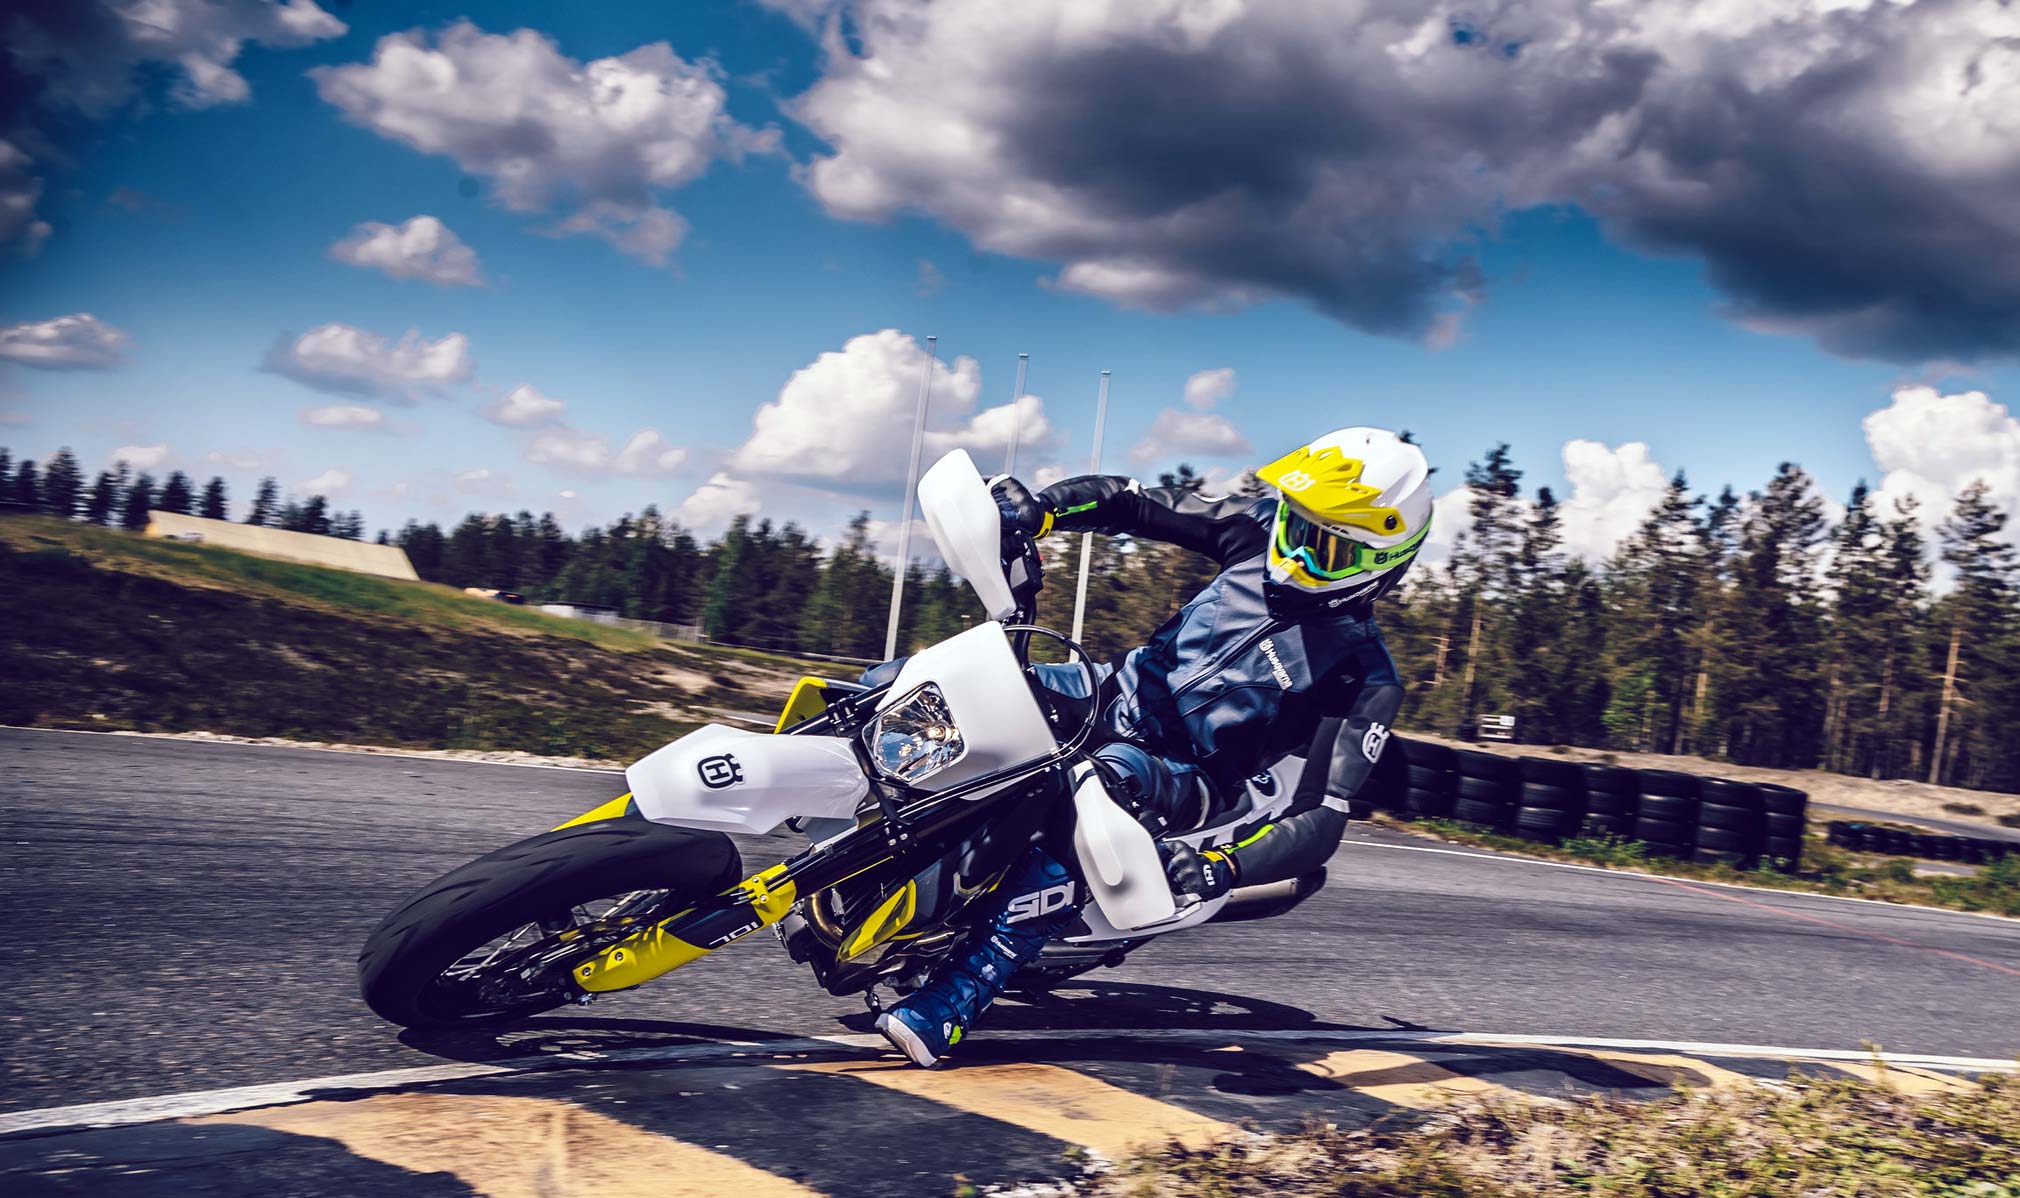 2020 Husqvarna 701 Supermoto Guide • Total Motorcycle